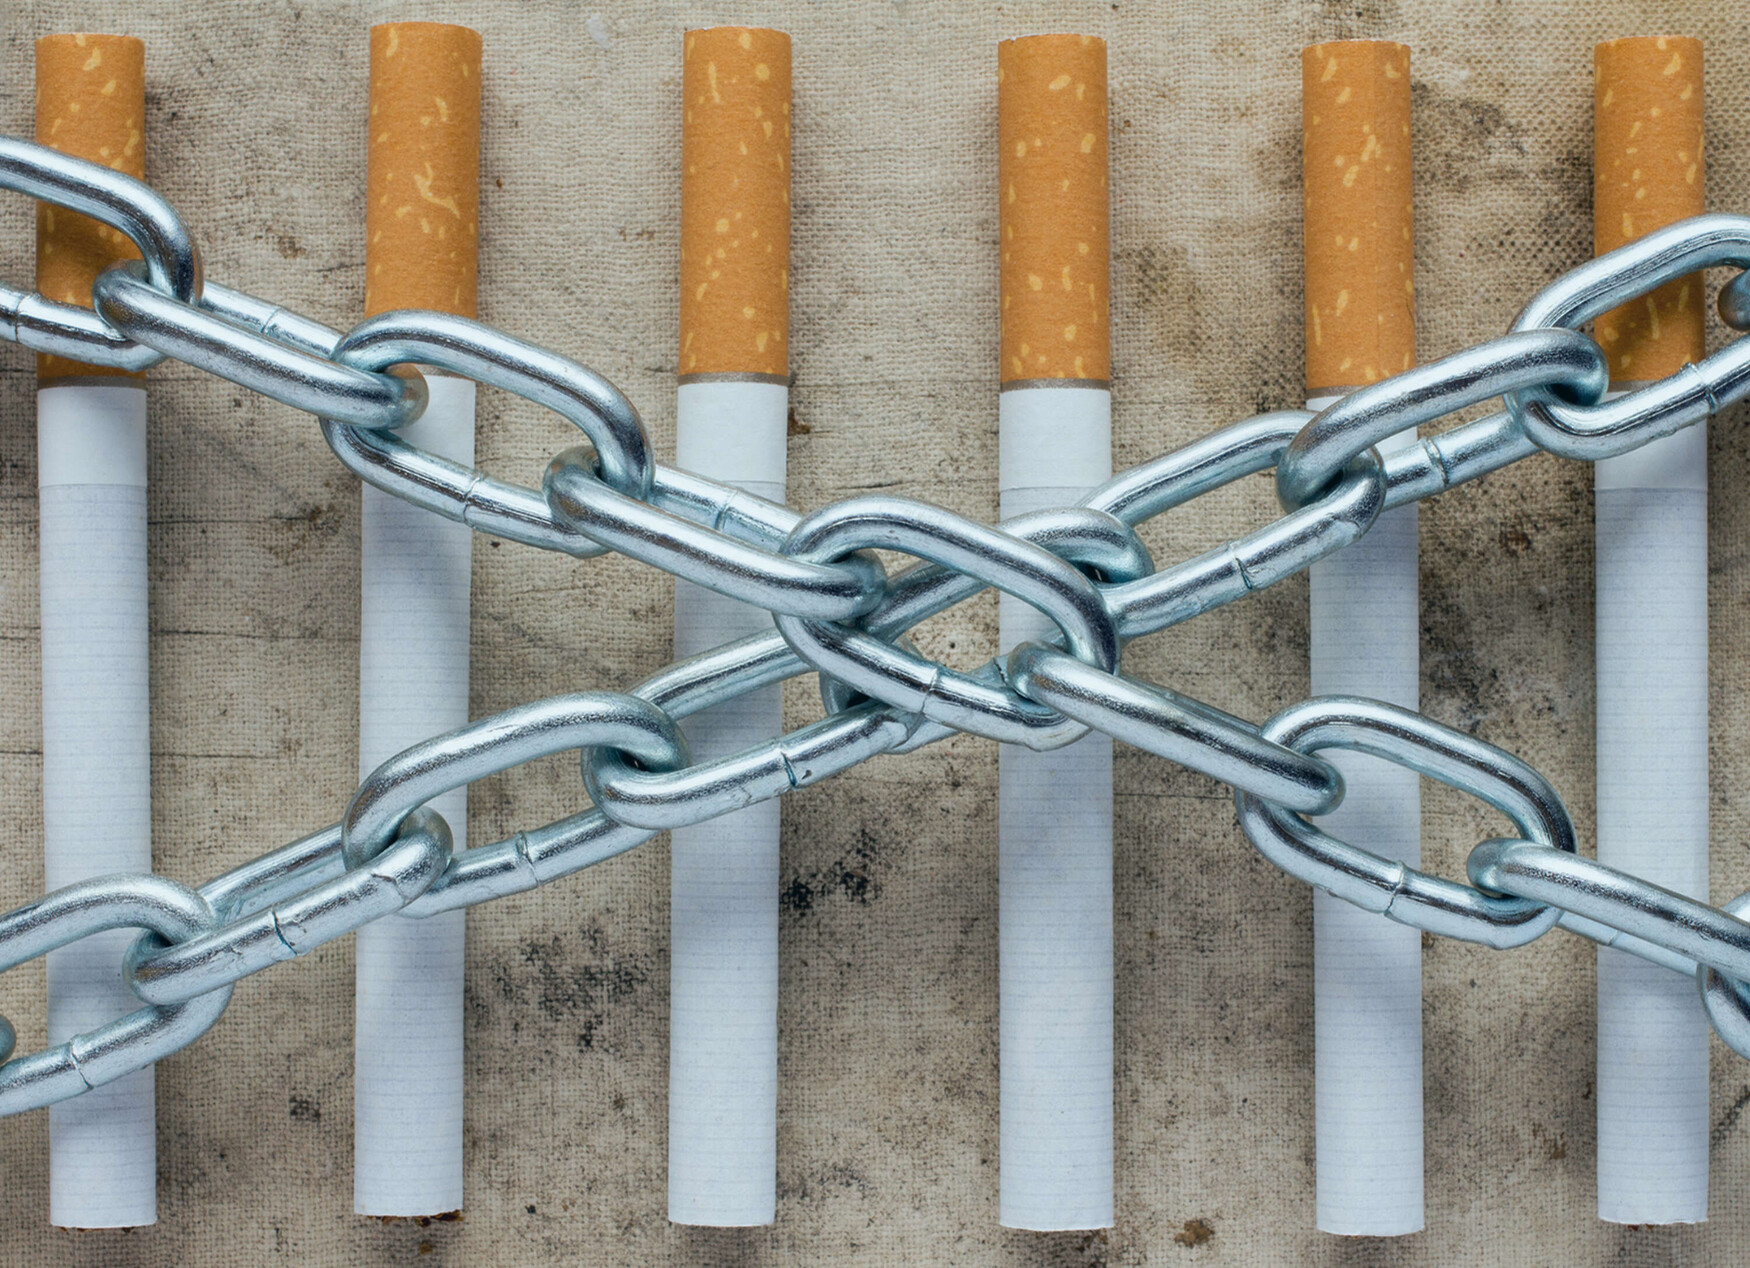 An image of cigarettes and chains, symbolizing nicotine dependence